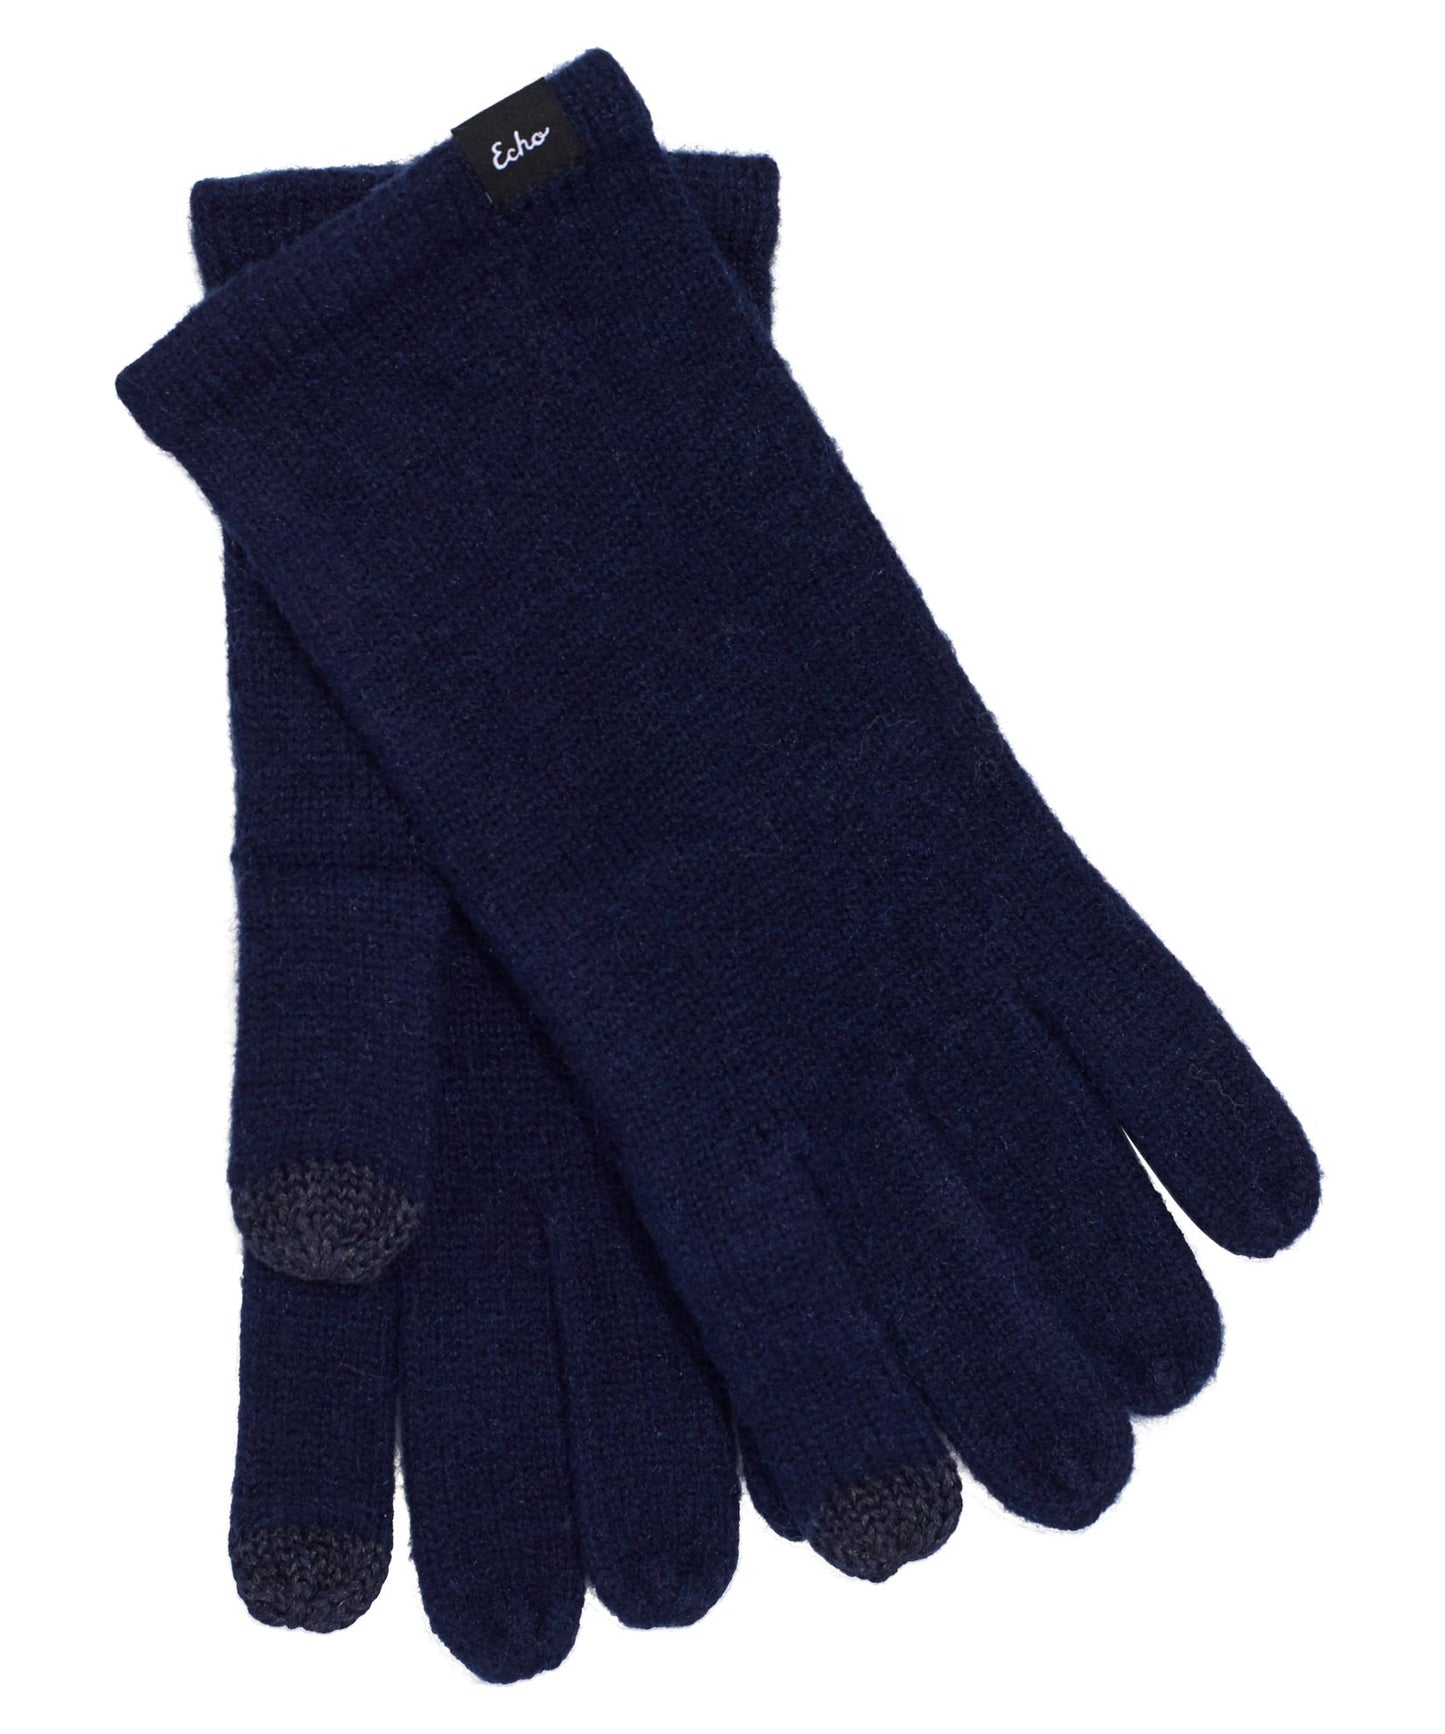 Echo Knit Touch Glove in color Echo Navy